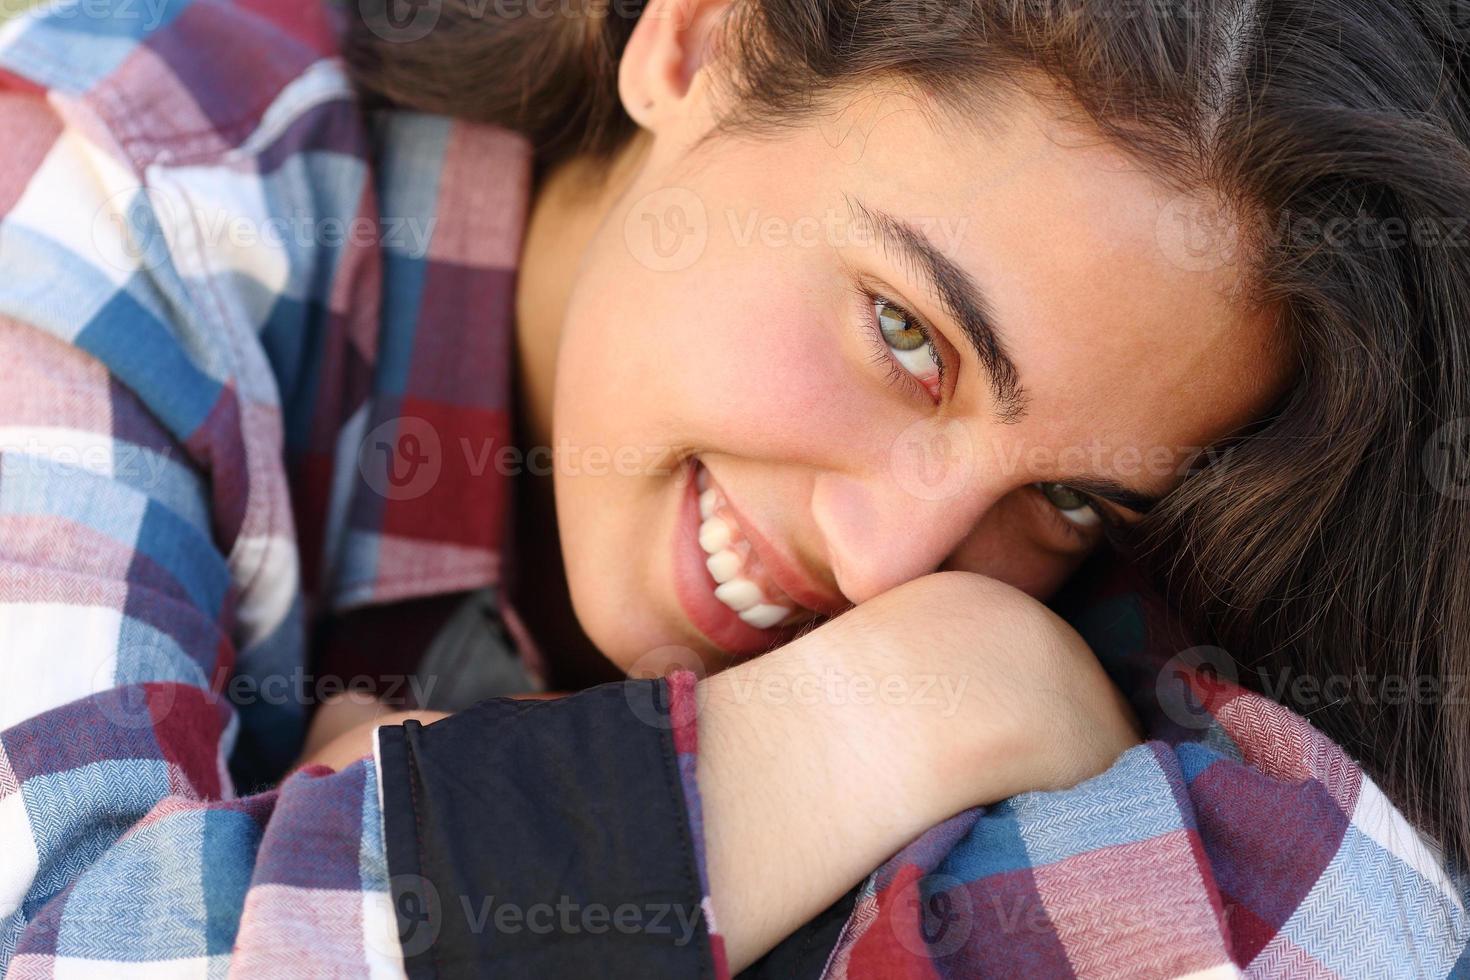 Wonderful beauty teenager Portrait Of A Beautiful Teenager Girl Smiling 1247833 Stock Photo At Vecteezy